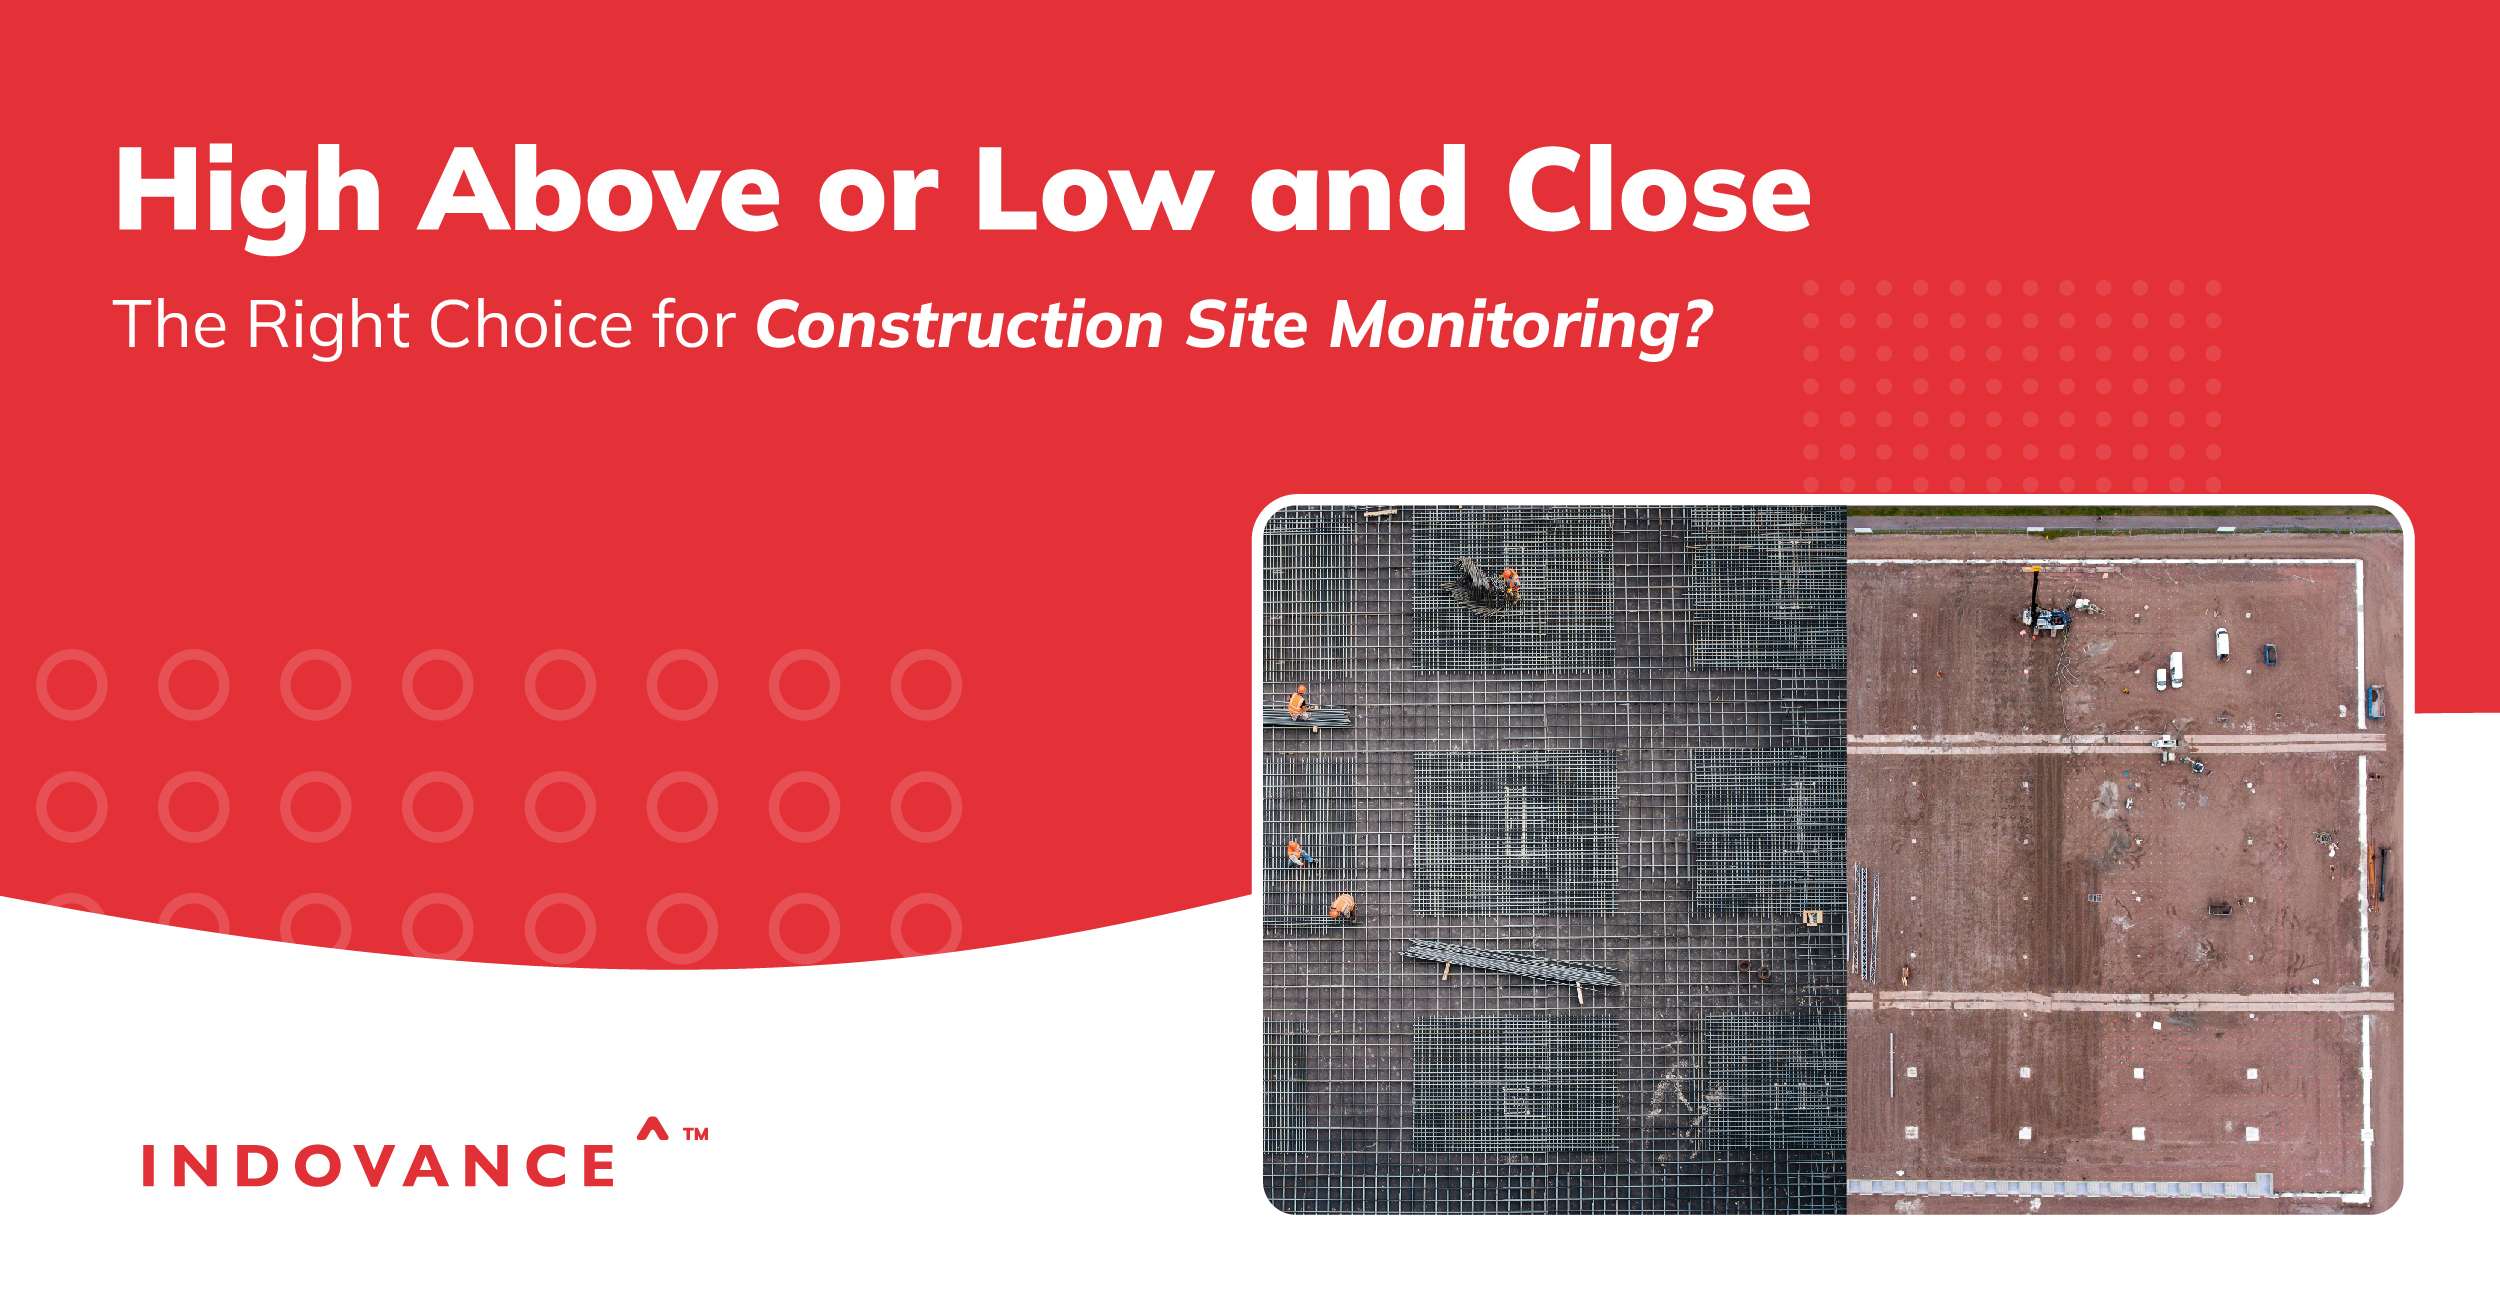 Satellite Imagery or Drones – Which Eye Would You Choose for Construction Site Monitoring?